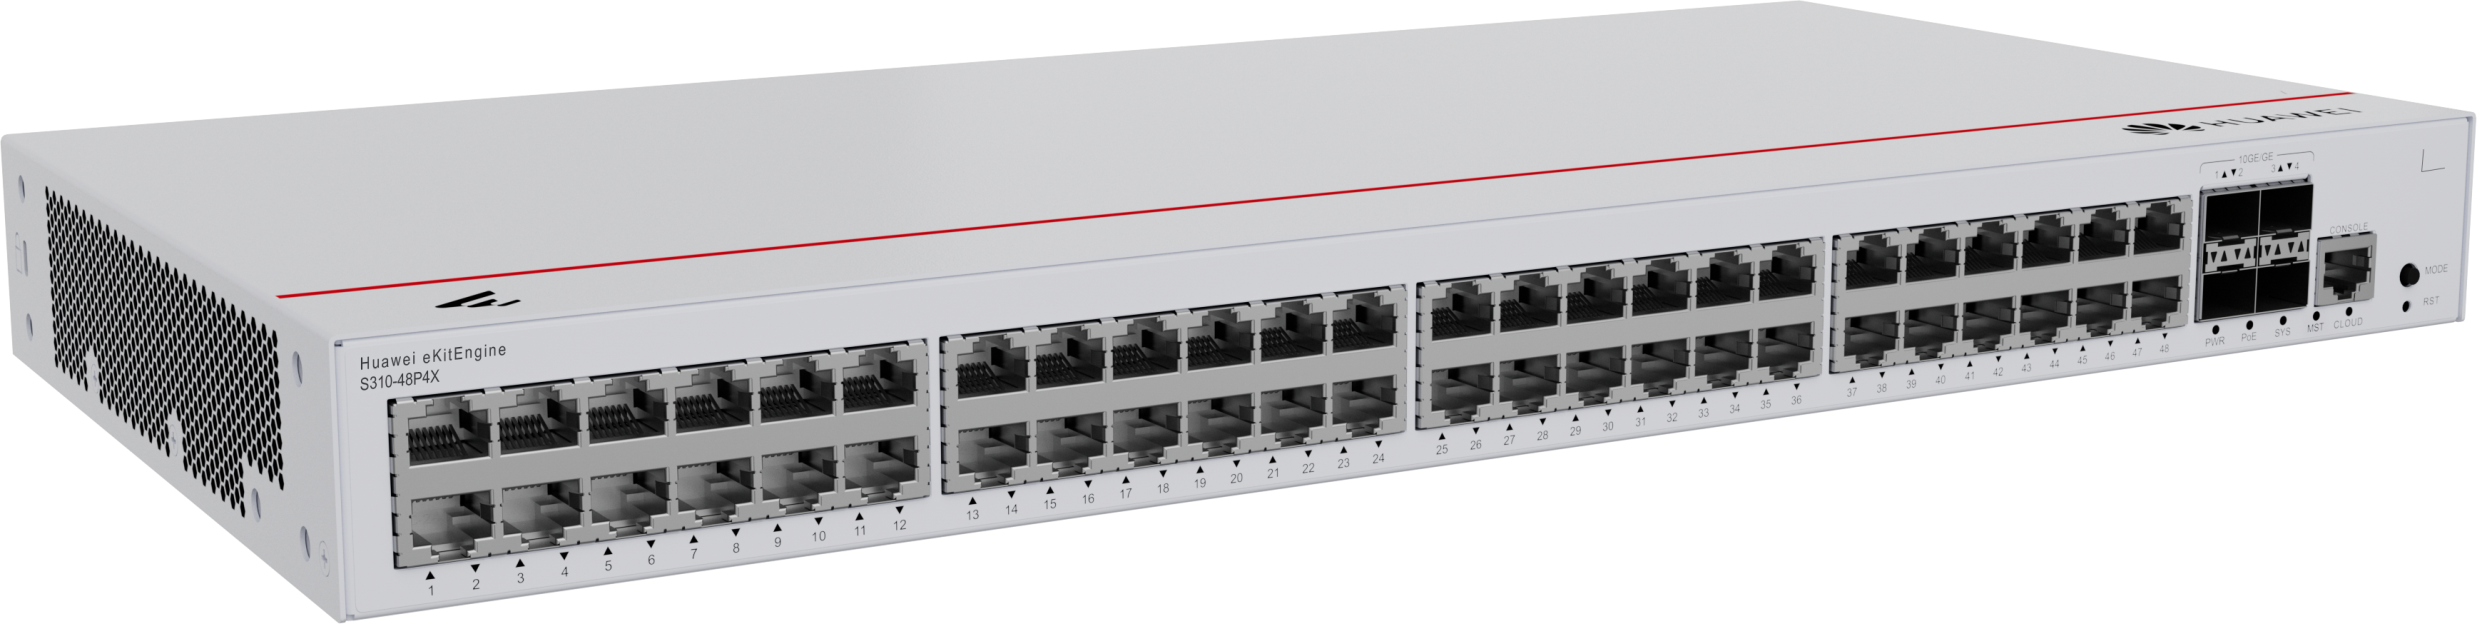 Huawei S310-48P4X Switch (48*10/100/1000BASE-T ports(380W PoE+), 4*10GE SFP+ ports, built-in AC power)